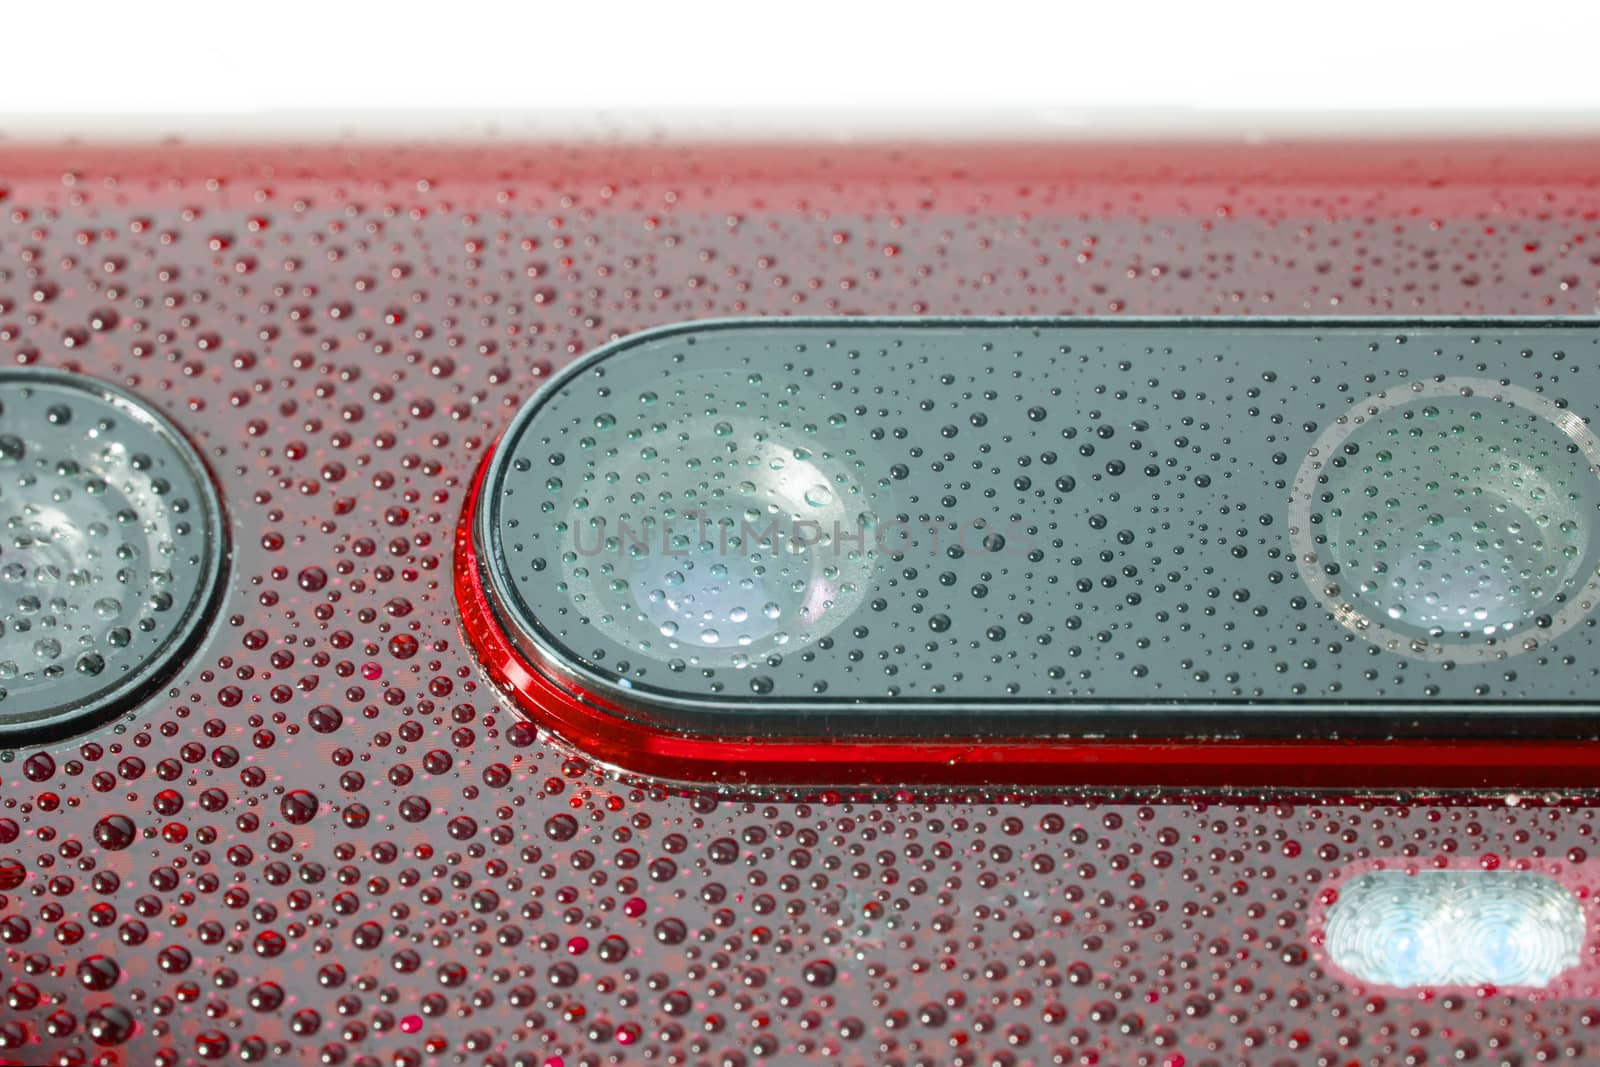 red phone camera lens covered with small water drops - close-up with selective focus and blur.